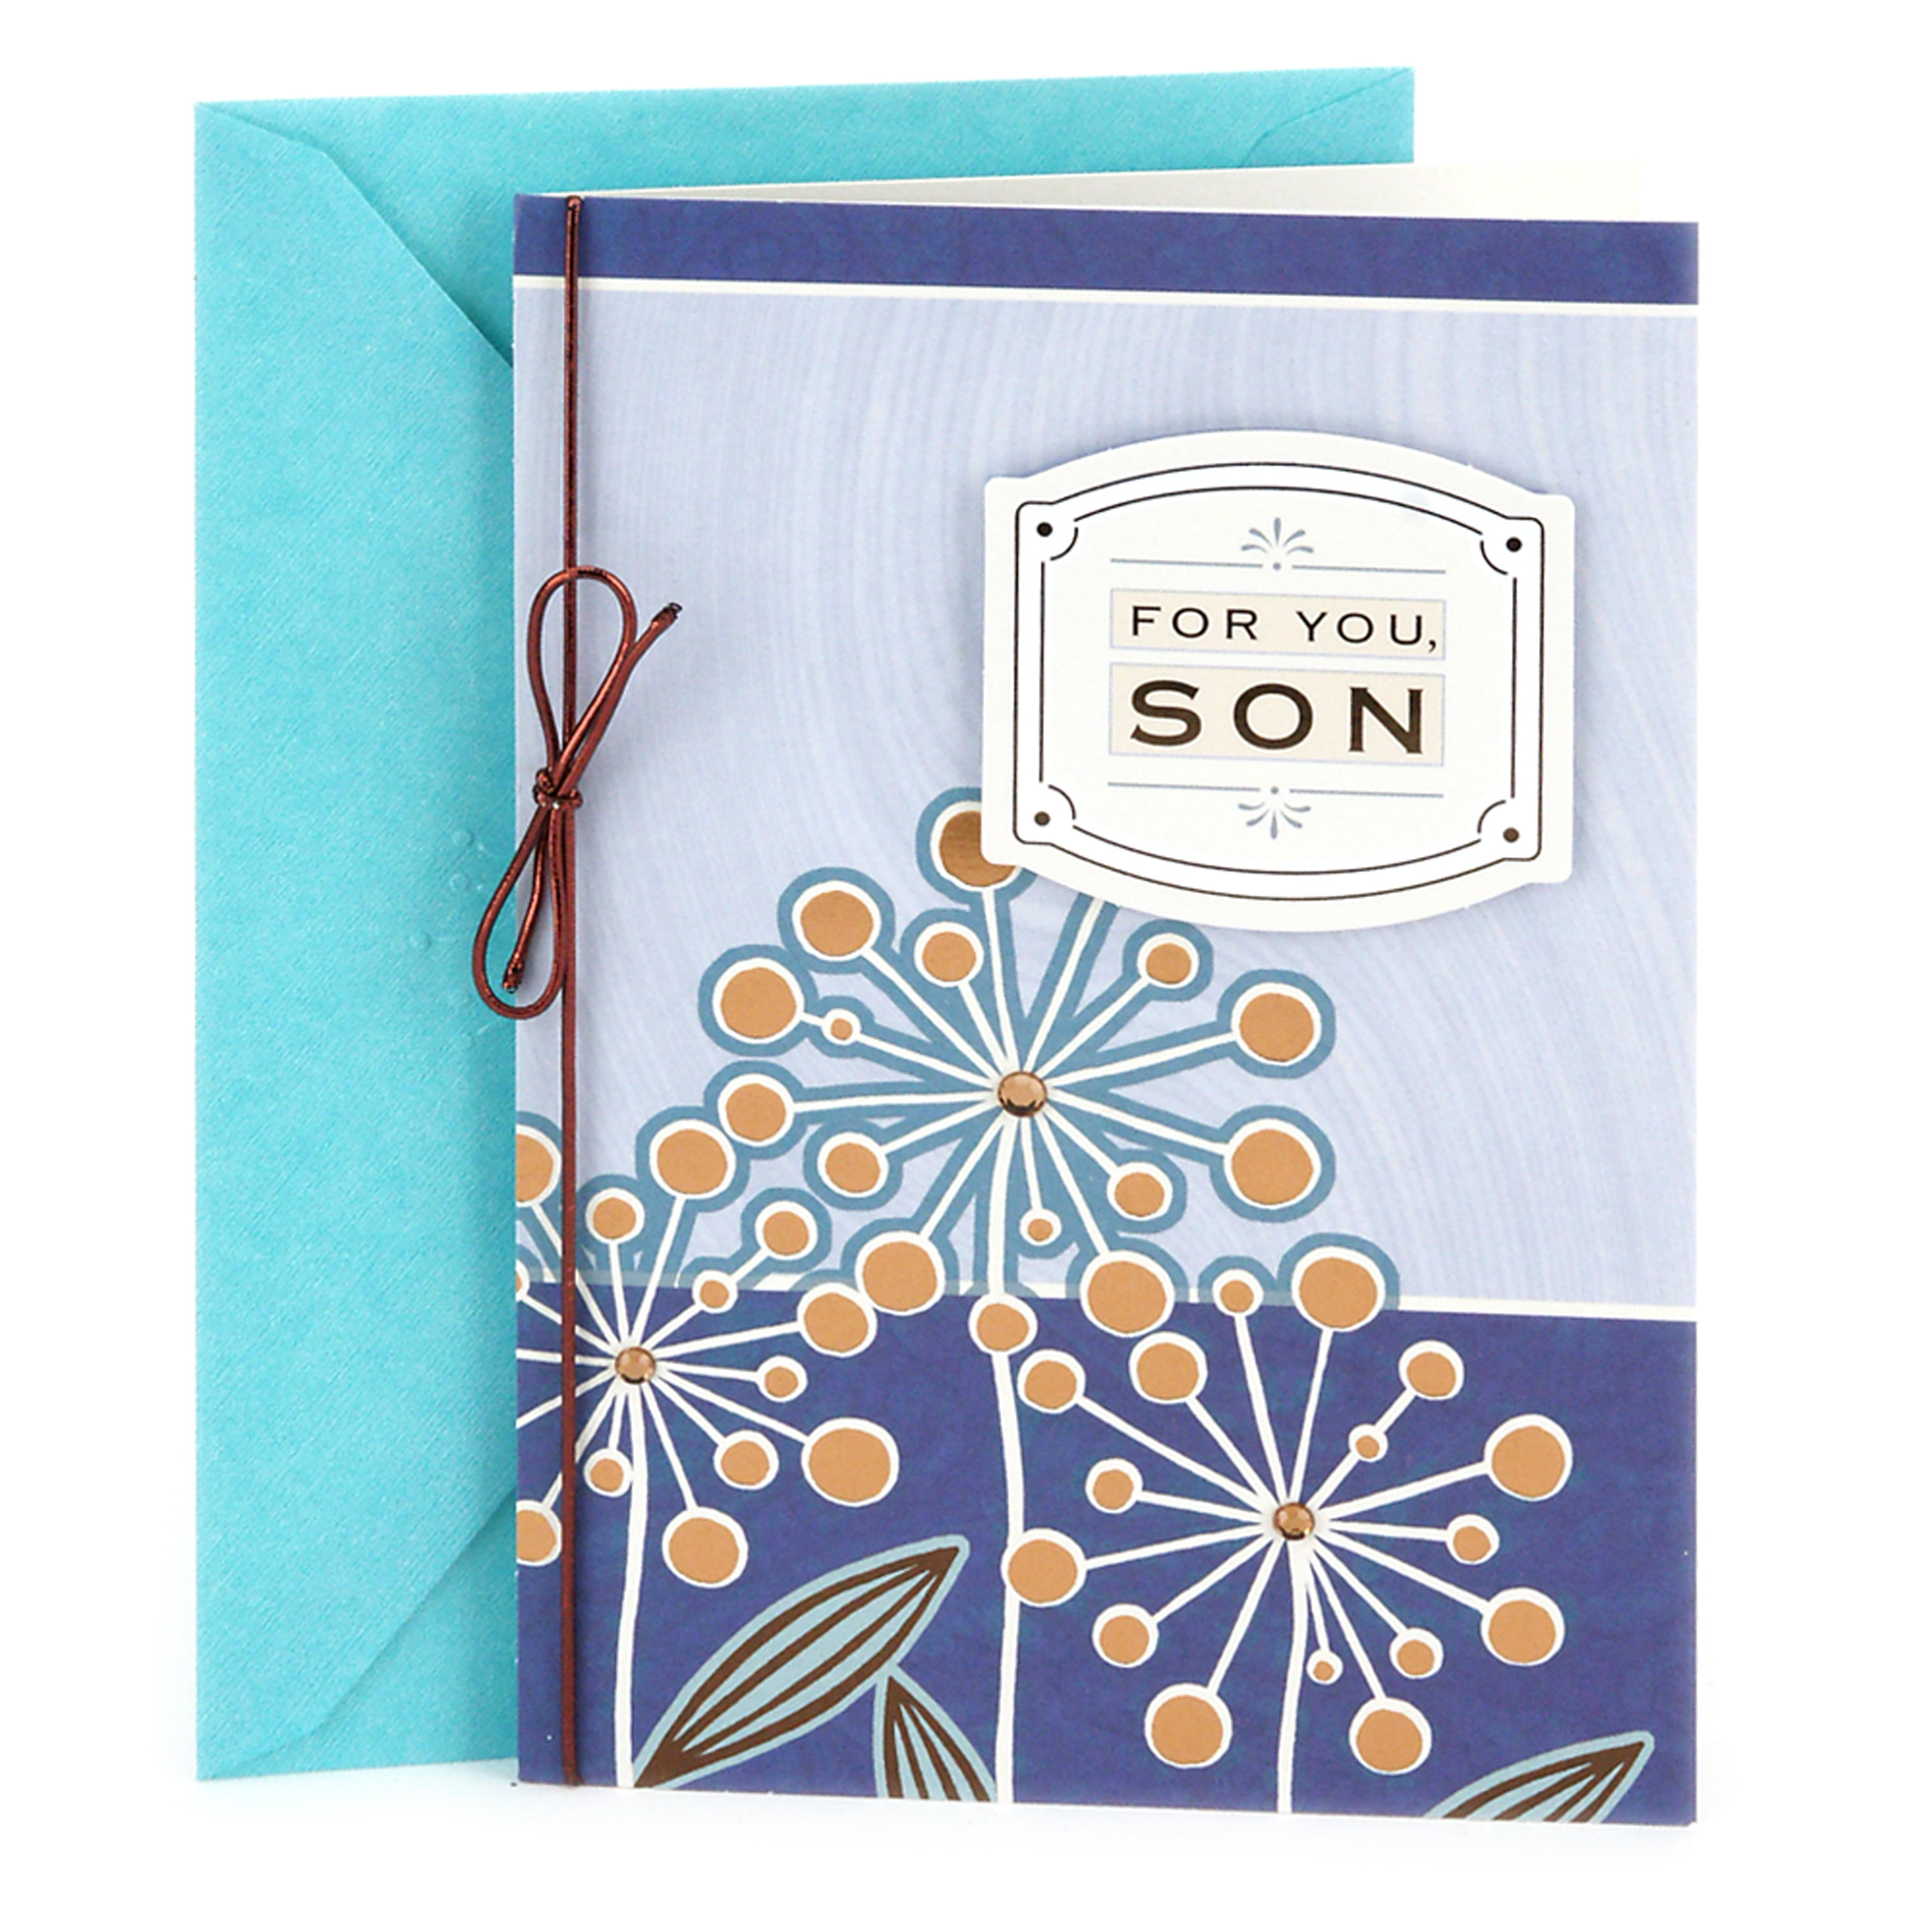 Hallmark greetings card-Proud of You Birthday Card for Son 